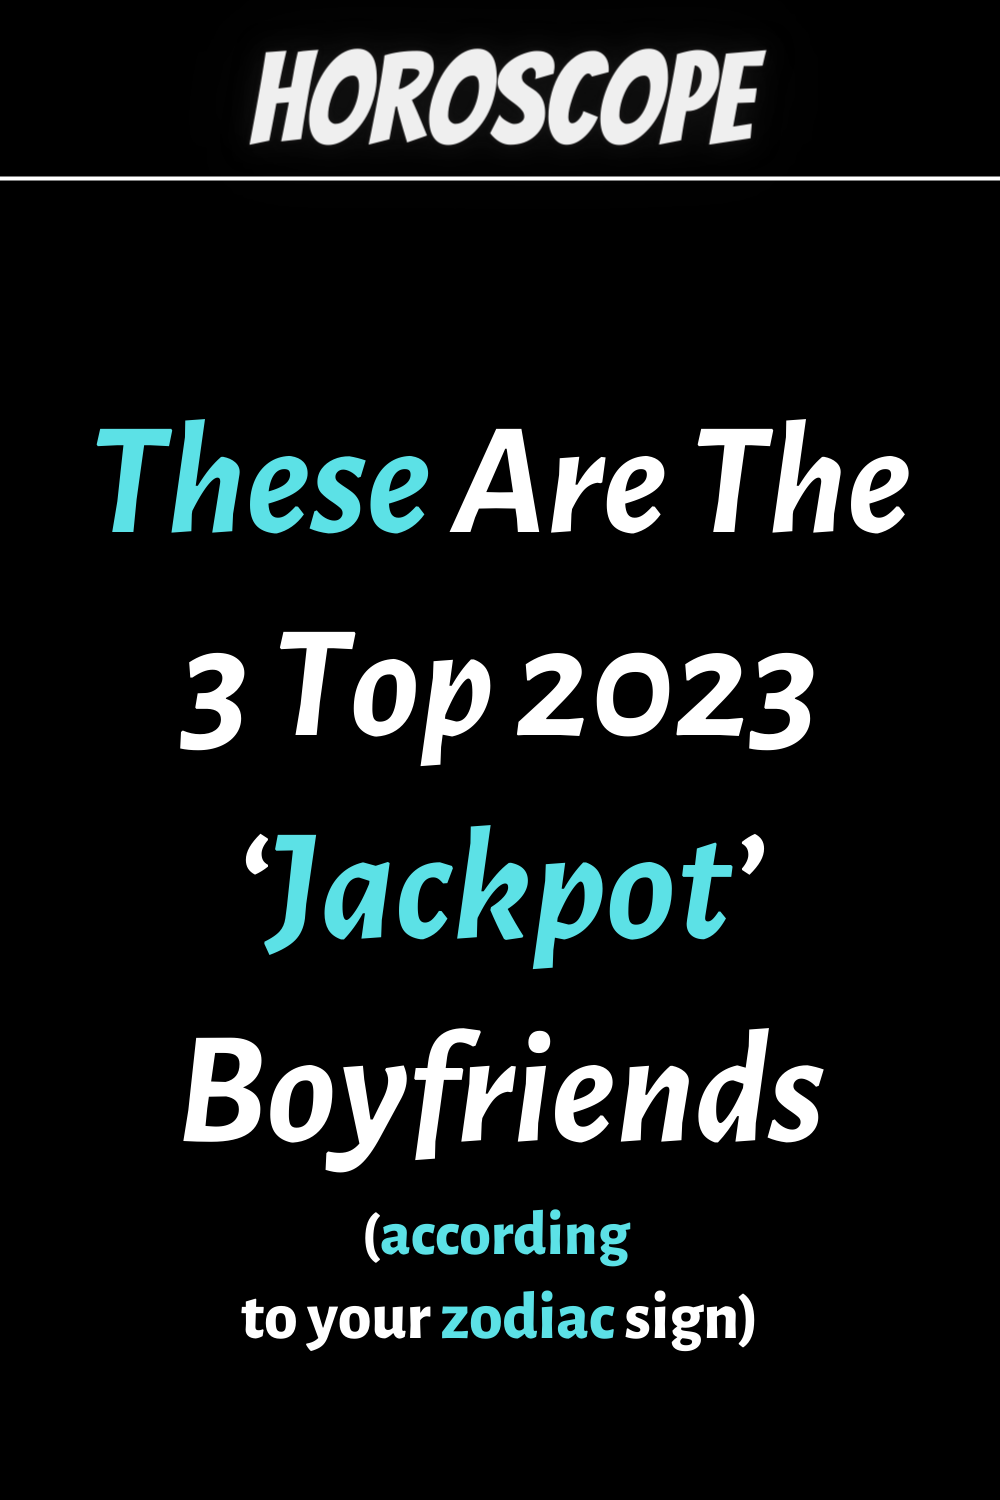 These Are The 3 Top 2023 ‘Jackpot’ Boyfriends, Based On Their Zodiac Sign